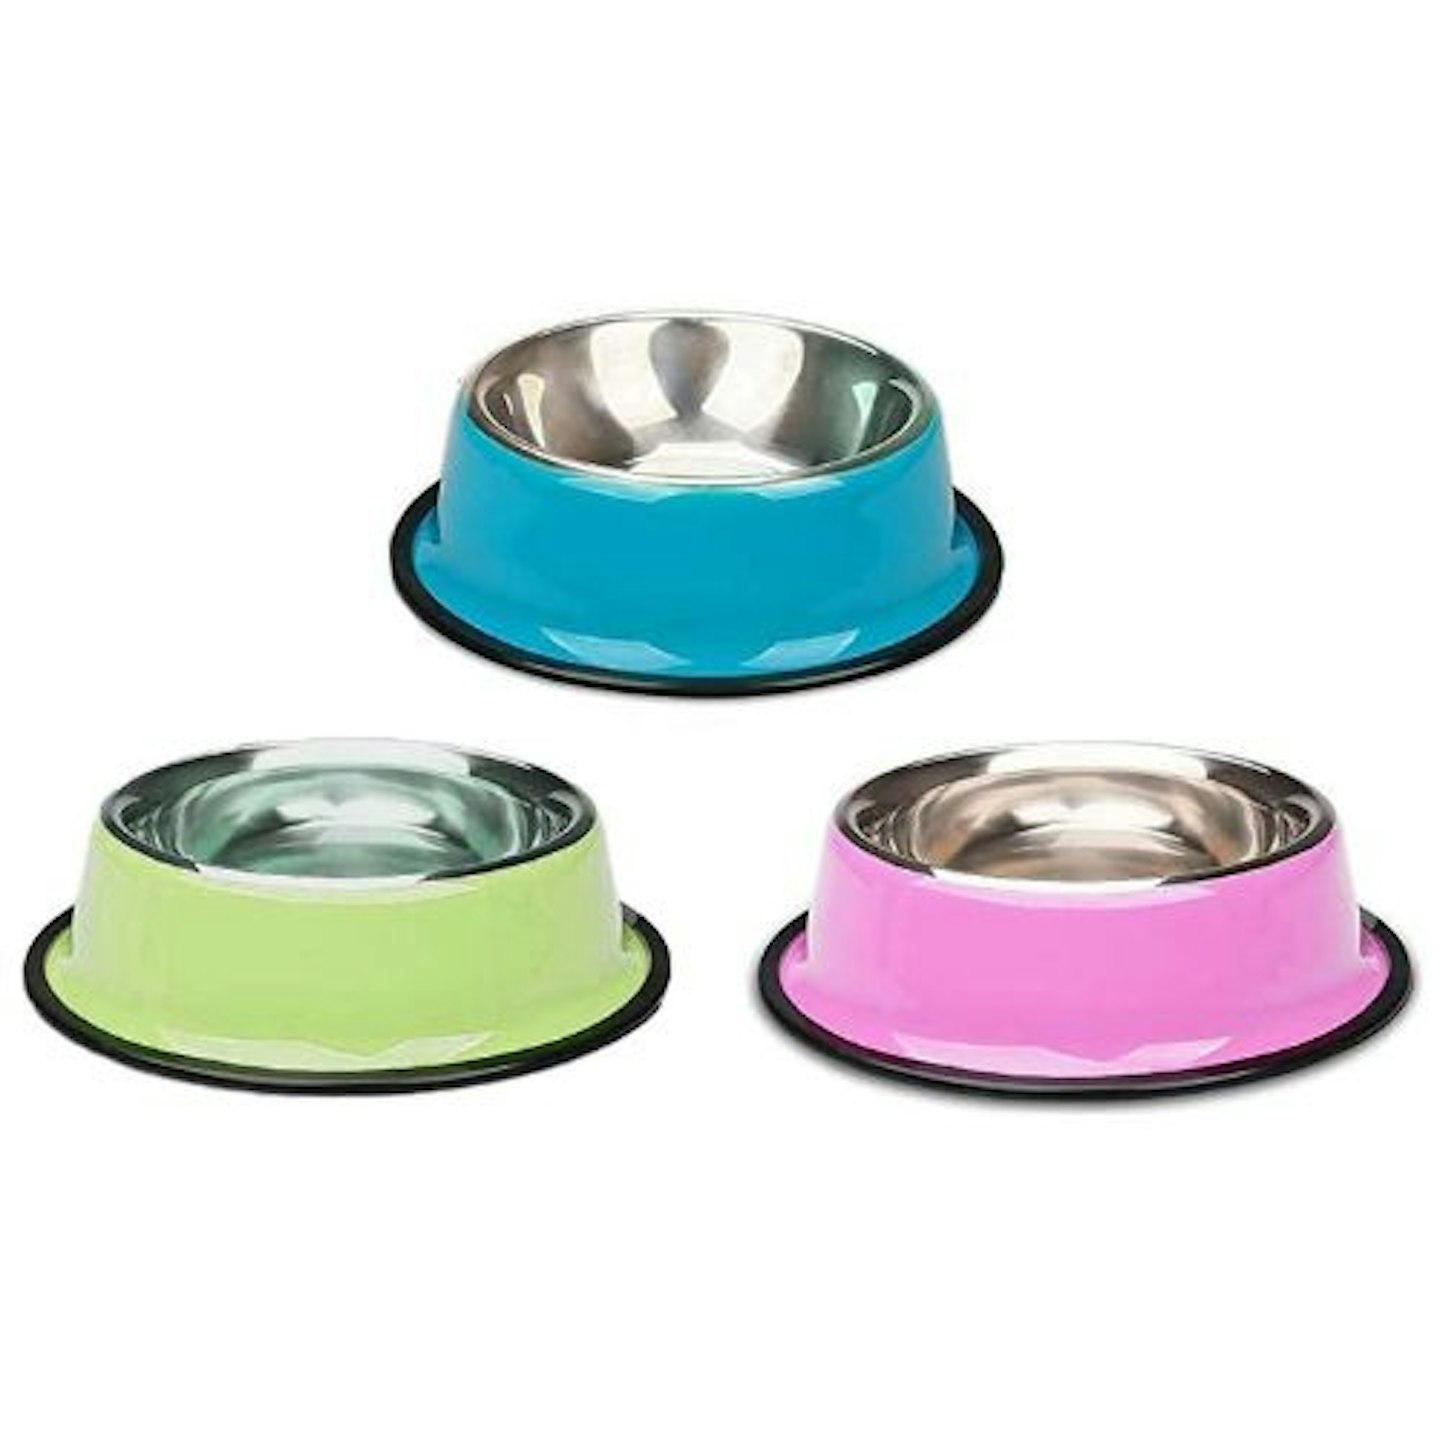 Stainless Steel Non-Slip and Leak-Proof Cat Food Bowl